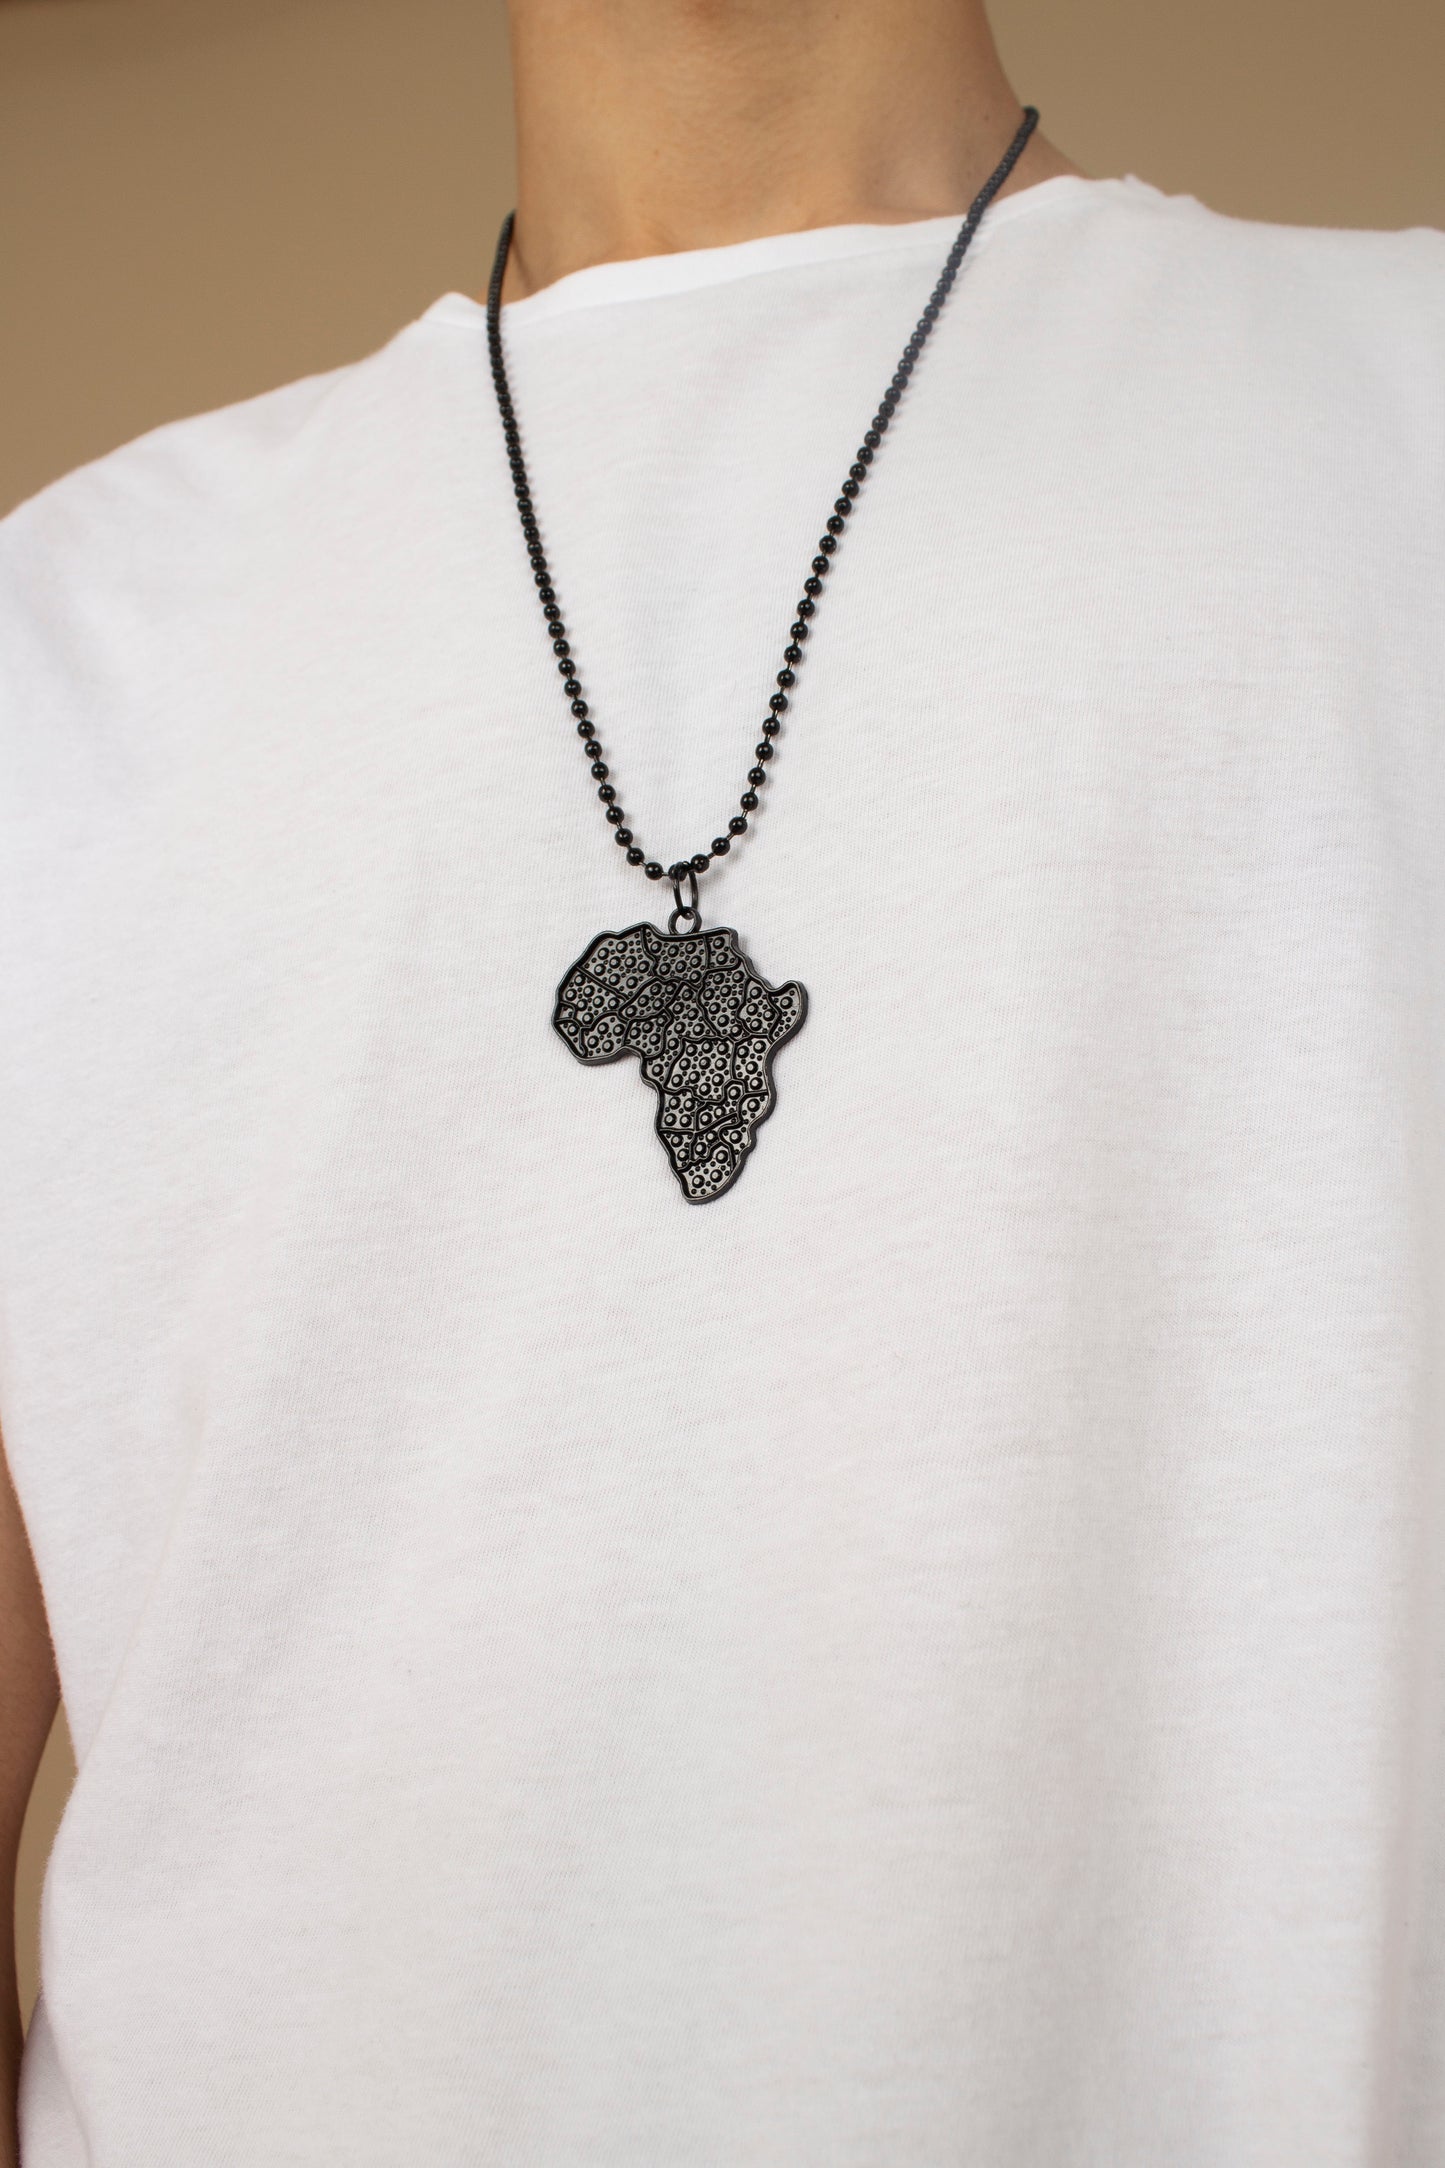 Unisex necklace with a African Map pendant featuring black metallic textured detailing and a metallic chain link. Available in one-size, Designed in England Made in Nigeria.